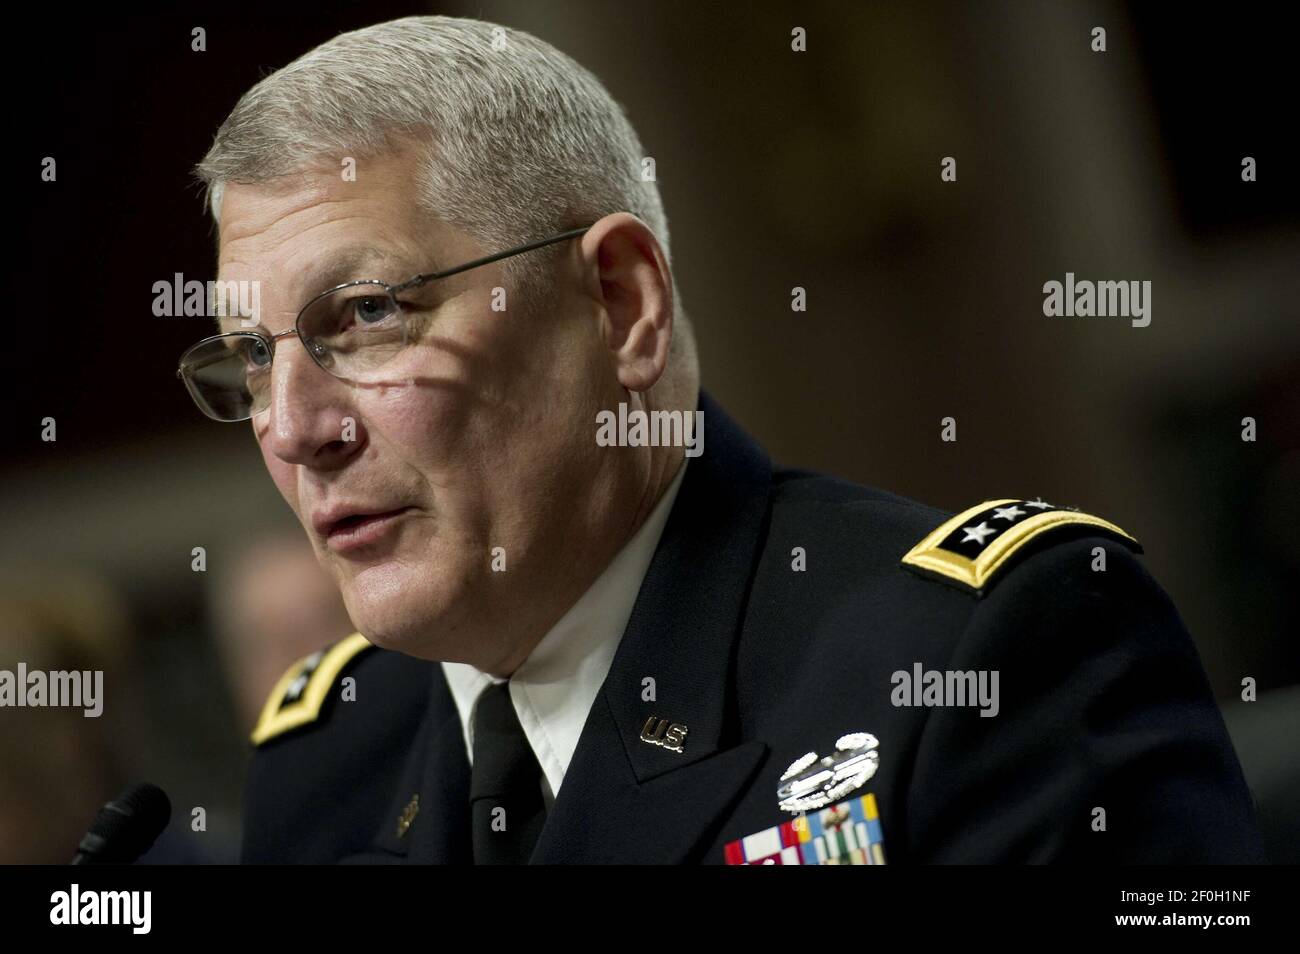 2 December 2010 - Washington, D.C. - Commander, U.S. Army Europe Gen. Carter Ham appears before the Senate Armed Services Committee regarding the findings of the 'Don't Ask, Don't Tell' Comprehensive Working Group report on Dec. 2, 2010. Secretary of Defense Robert M. Gates, Chairman of the Joint Chiefs of Staff Adm. Mike Mullen and Department of Defense General Counsel Jeh C. Johnson appeared before the committee regarding the findings of the survey. Photo Credit: Chad J. McNeeley/DOD/Sipa Press (Released)/dontasksipa.003/Please credit as Department of Defense photo by Mass Communication Spec Stock Photo